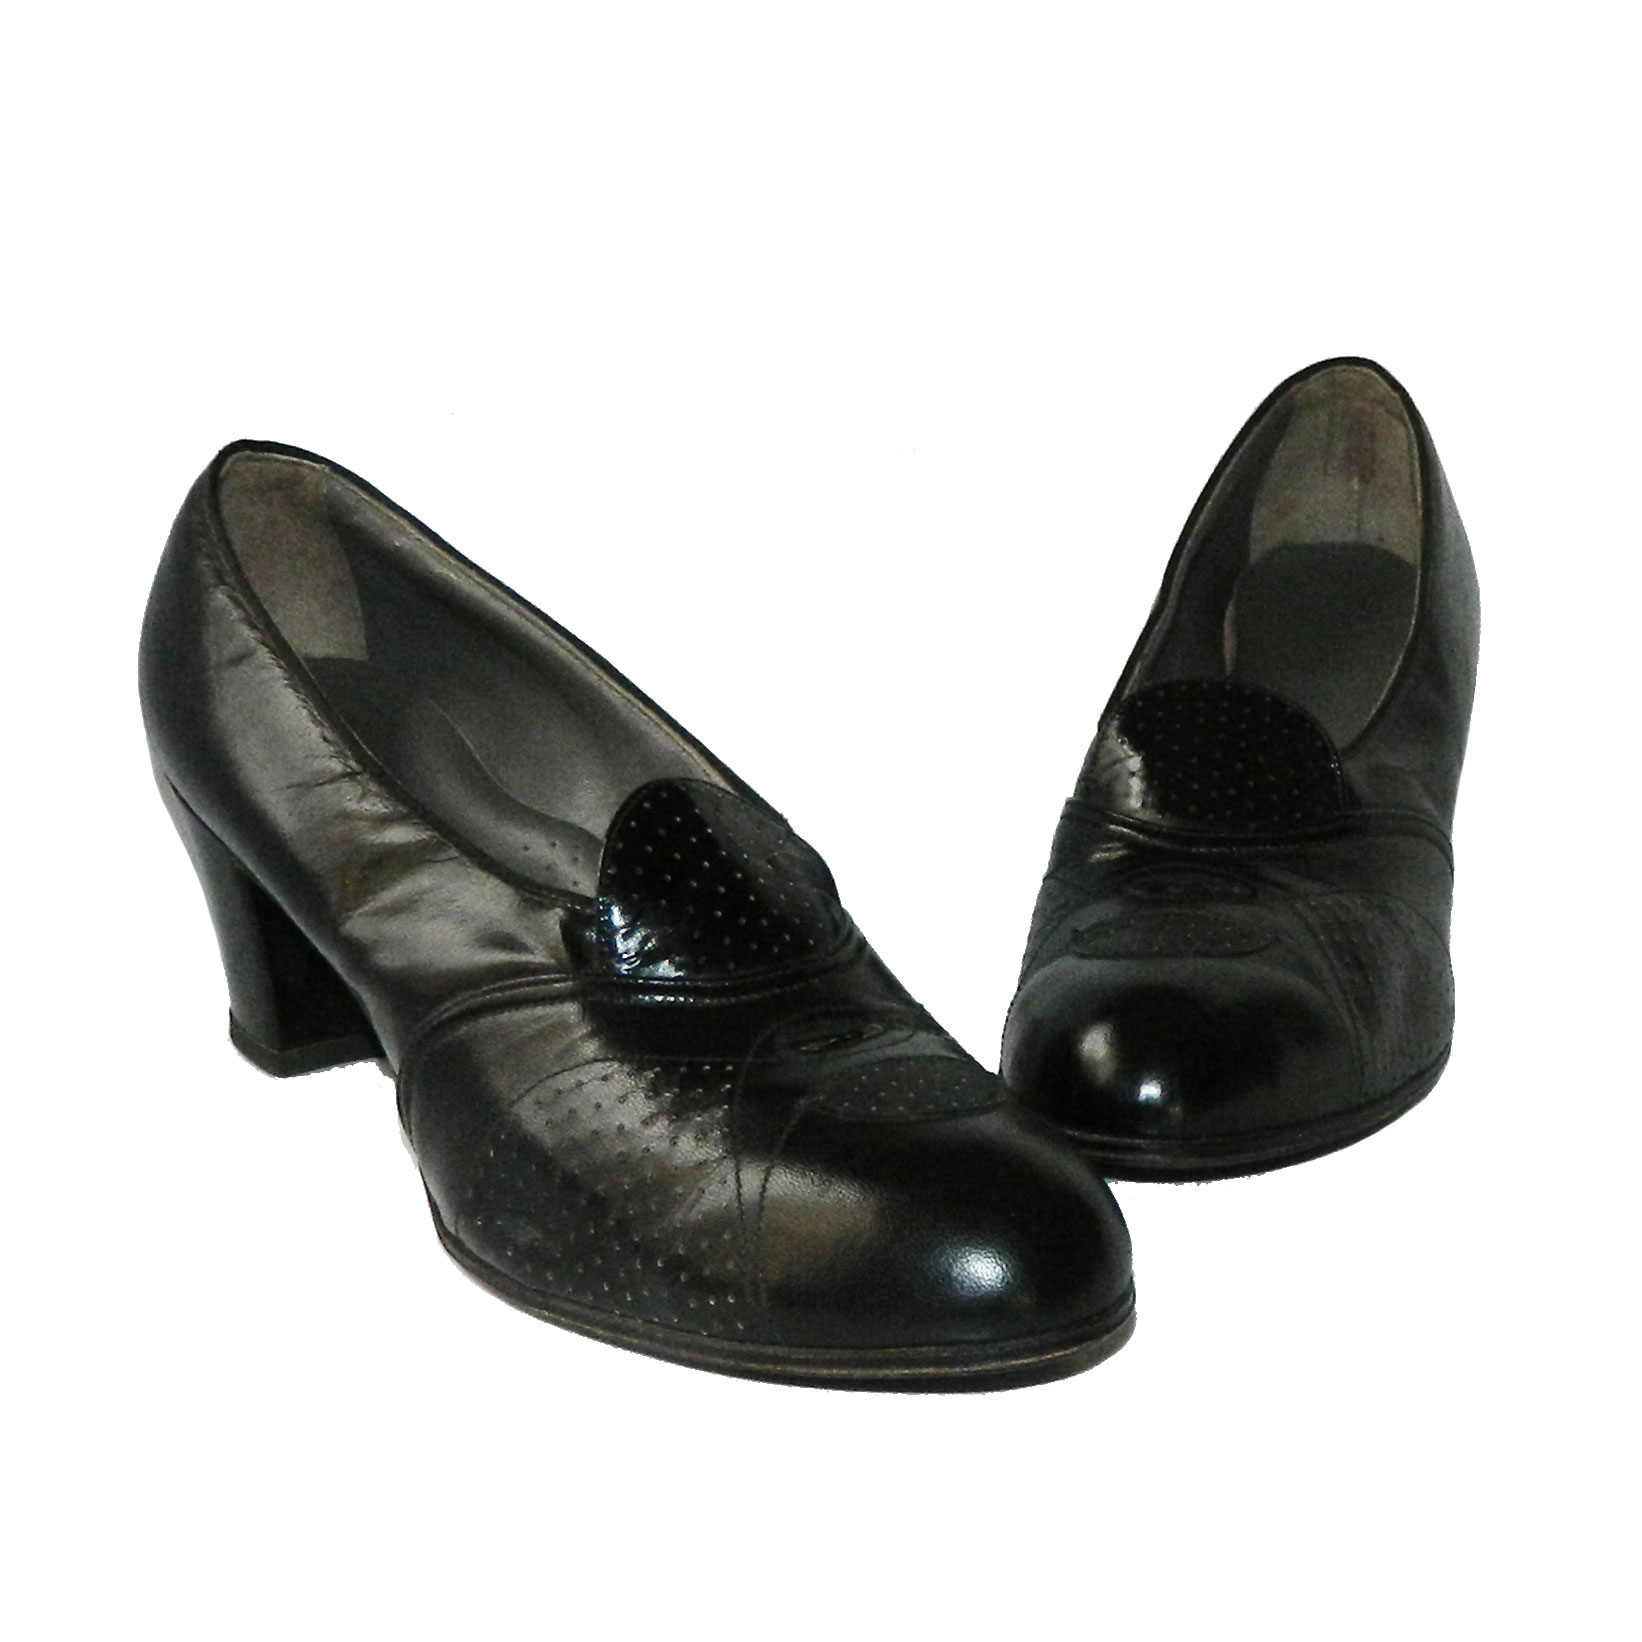 1940s Black Leather Shoes